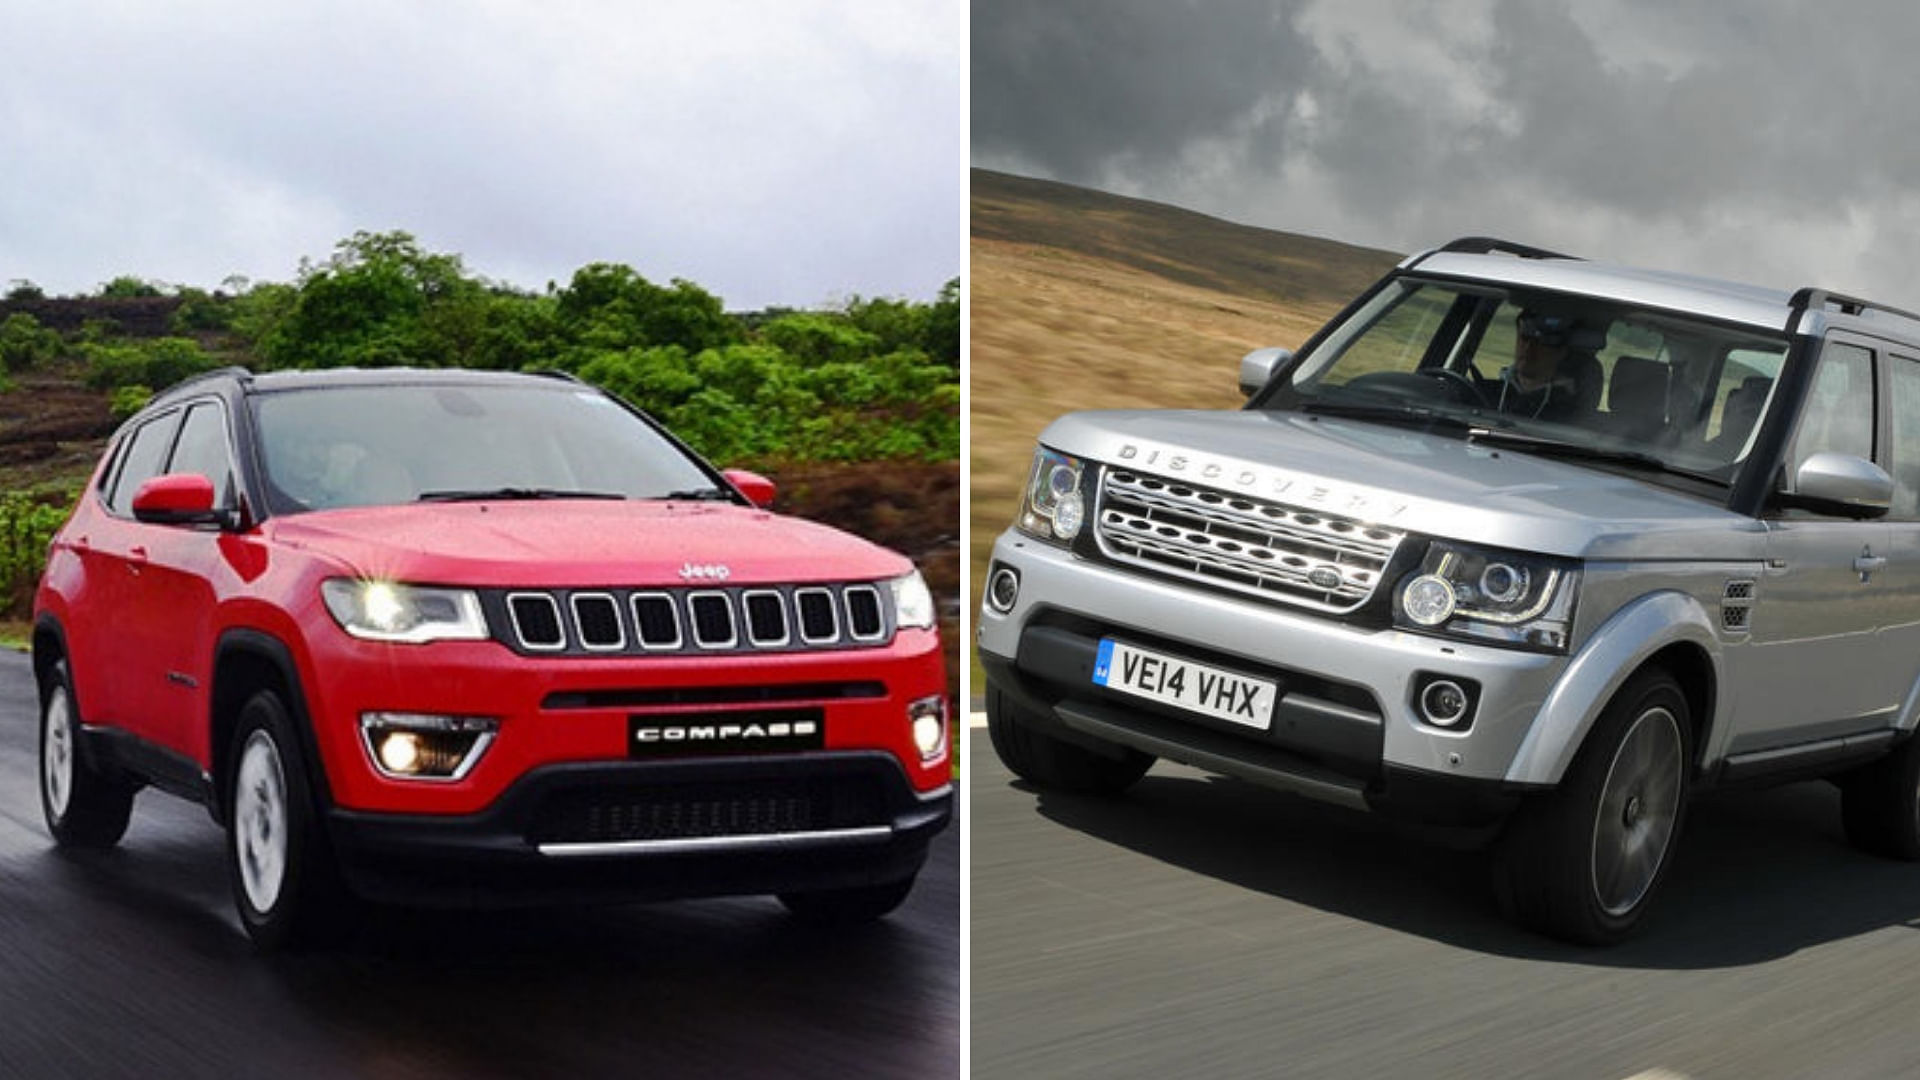 Fiat and Land Rover have issued recalls due to emission norms.